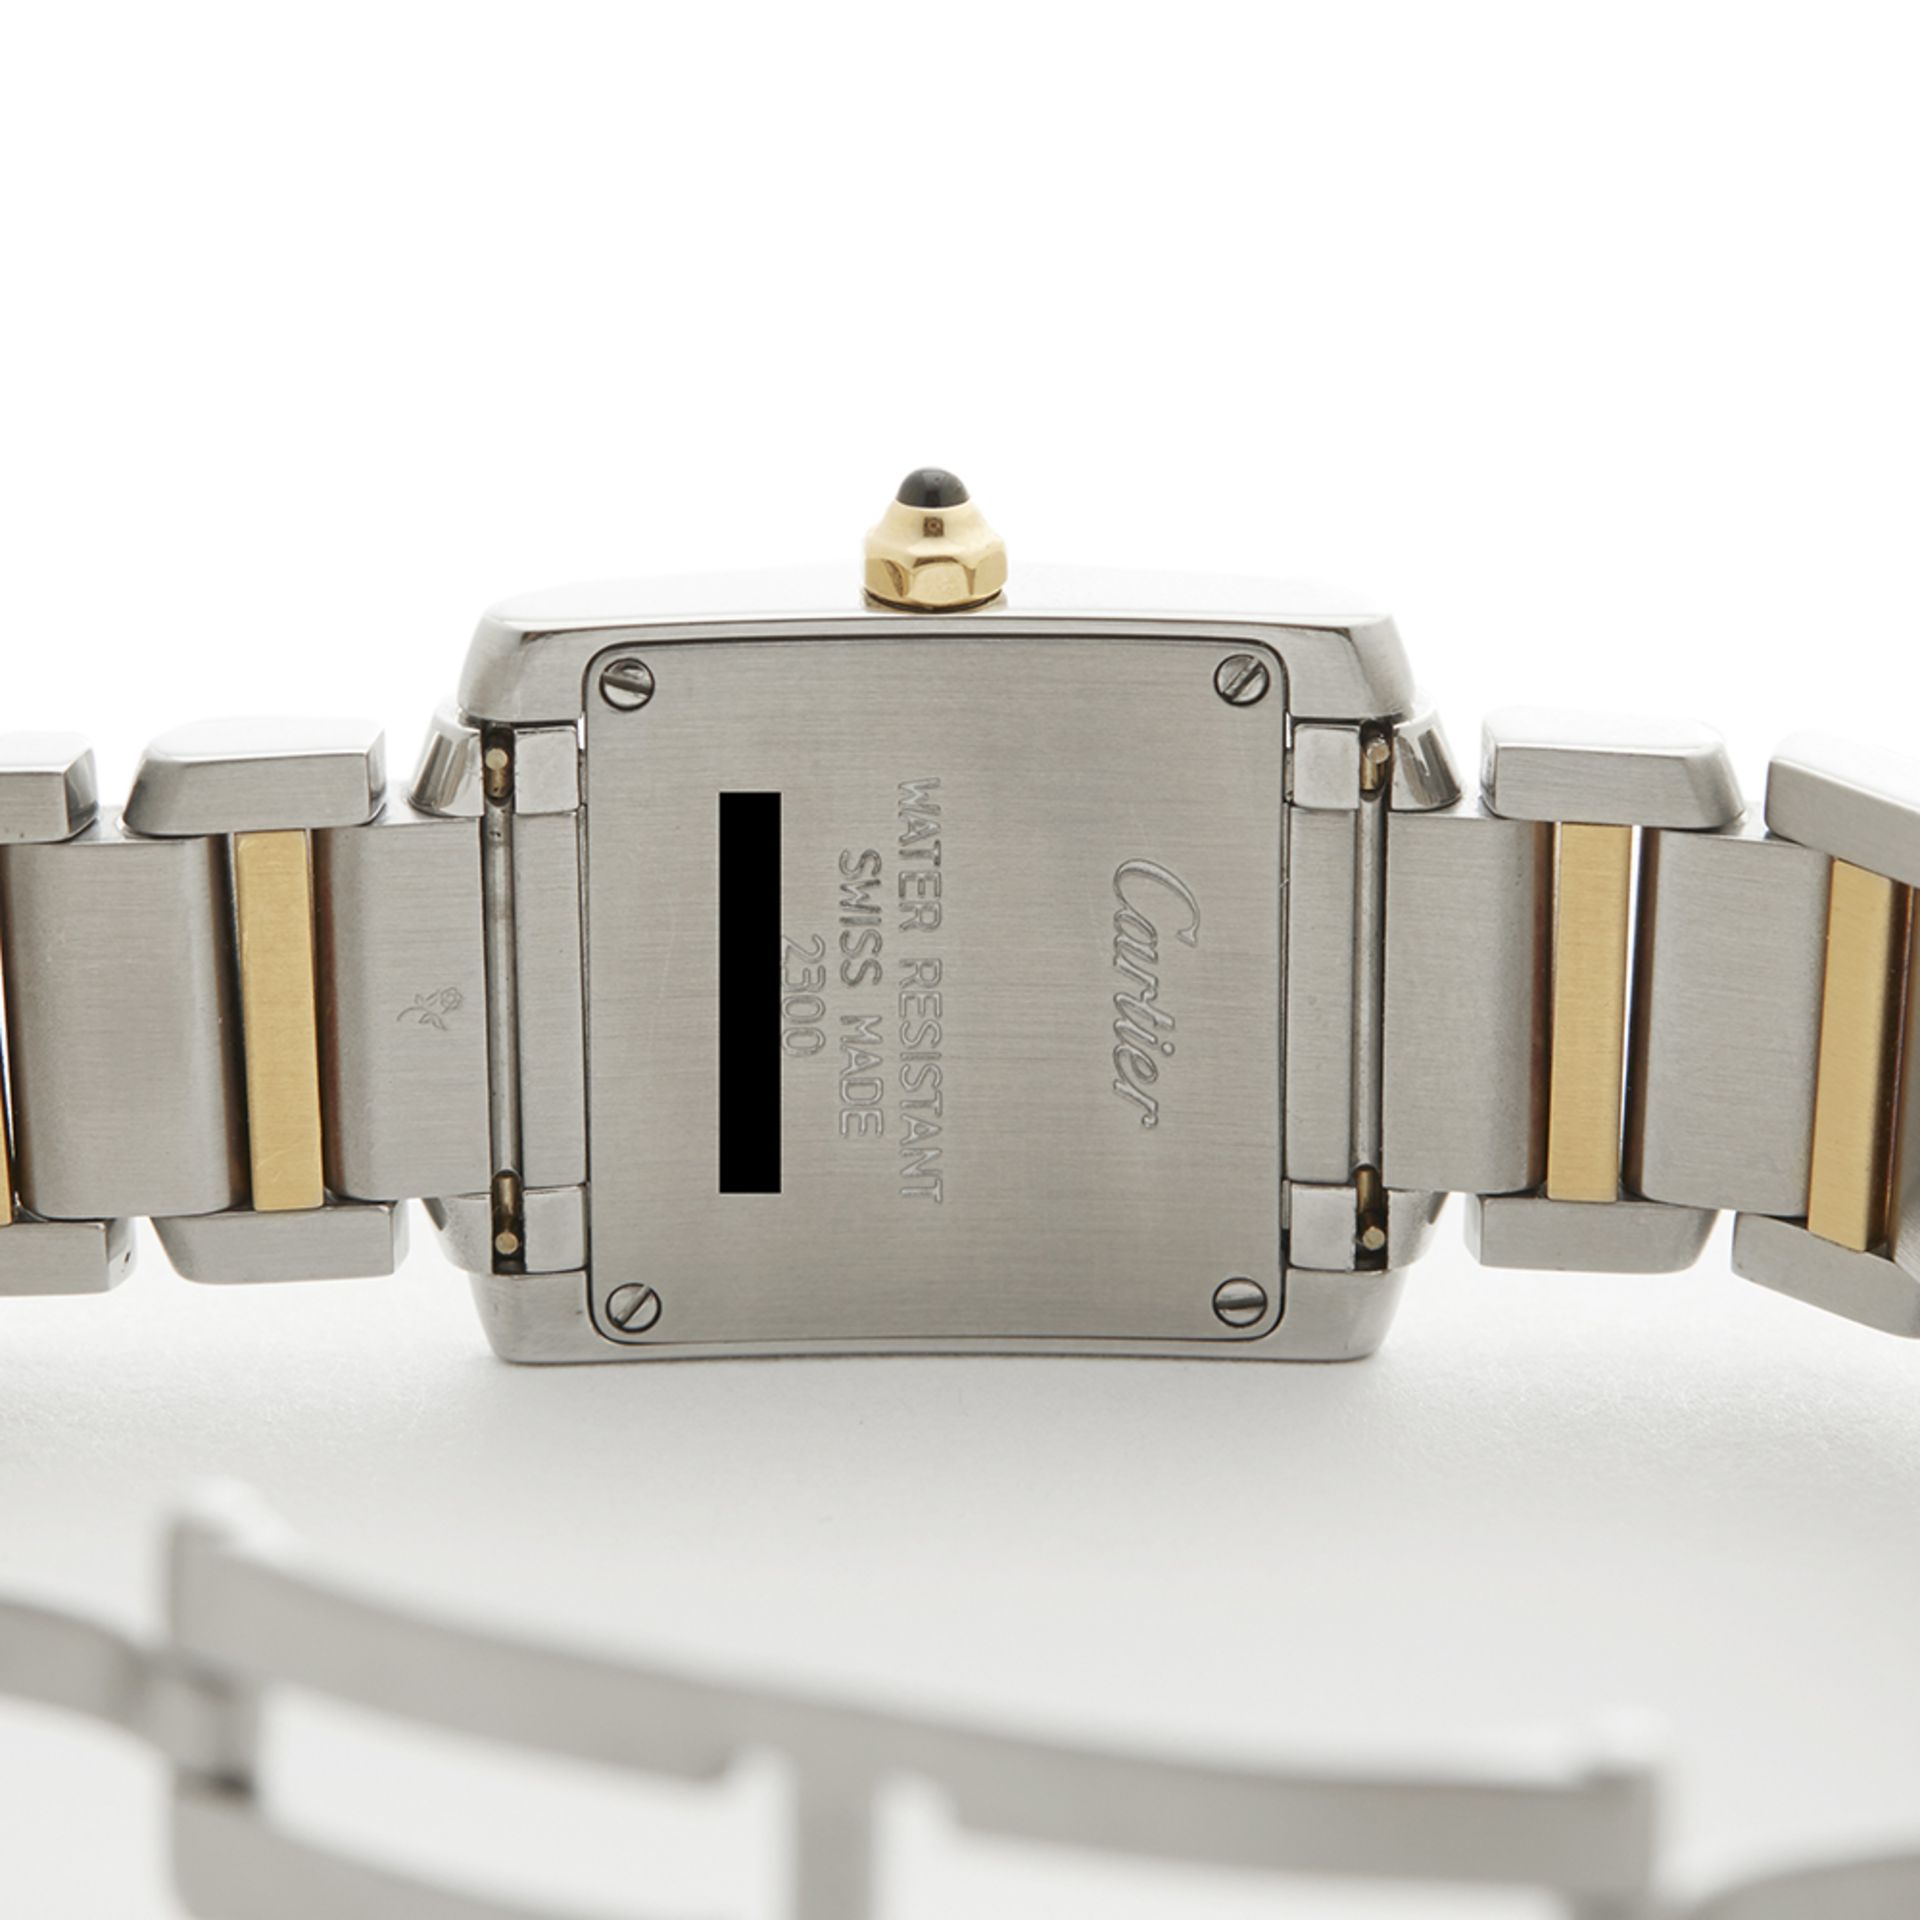 Cartier Tank Francaise 20mm stainless steel and 18k yellow gold 2300 - Image 8 of 8